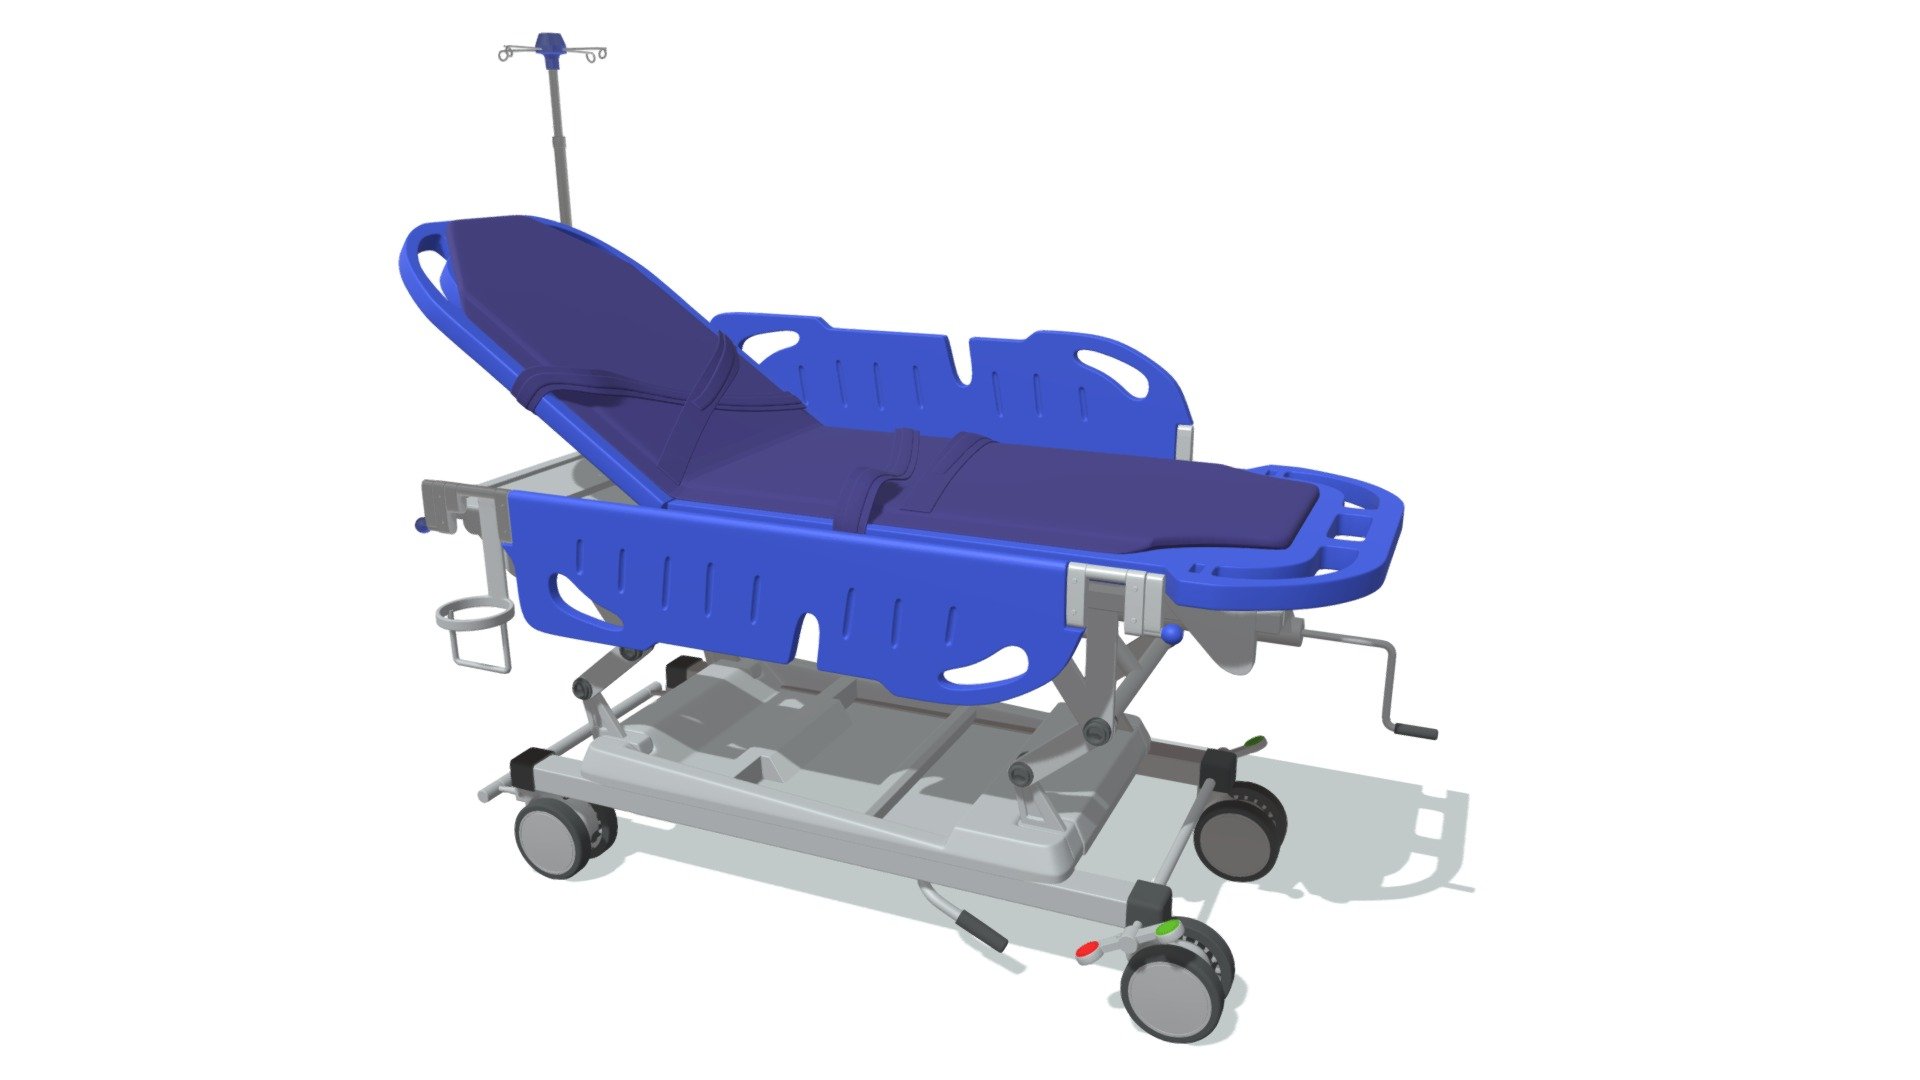 High quality 3d model of emergency stretcher trolley.
If you need a file format that is different from what is available, please contact us 3d model